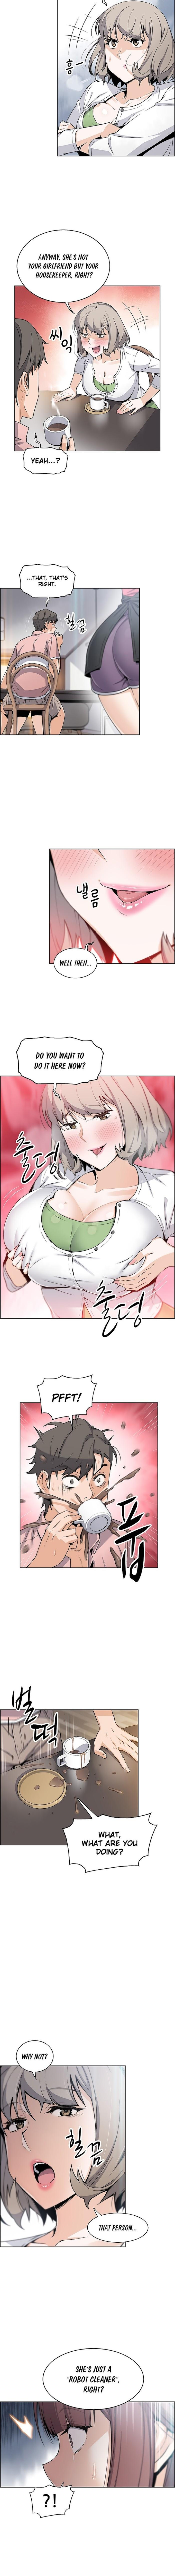 Housekeeper [Neck Pillow, Paper] Ch.49/49 [English] [Manhwa PDF] Completed 287